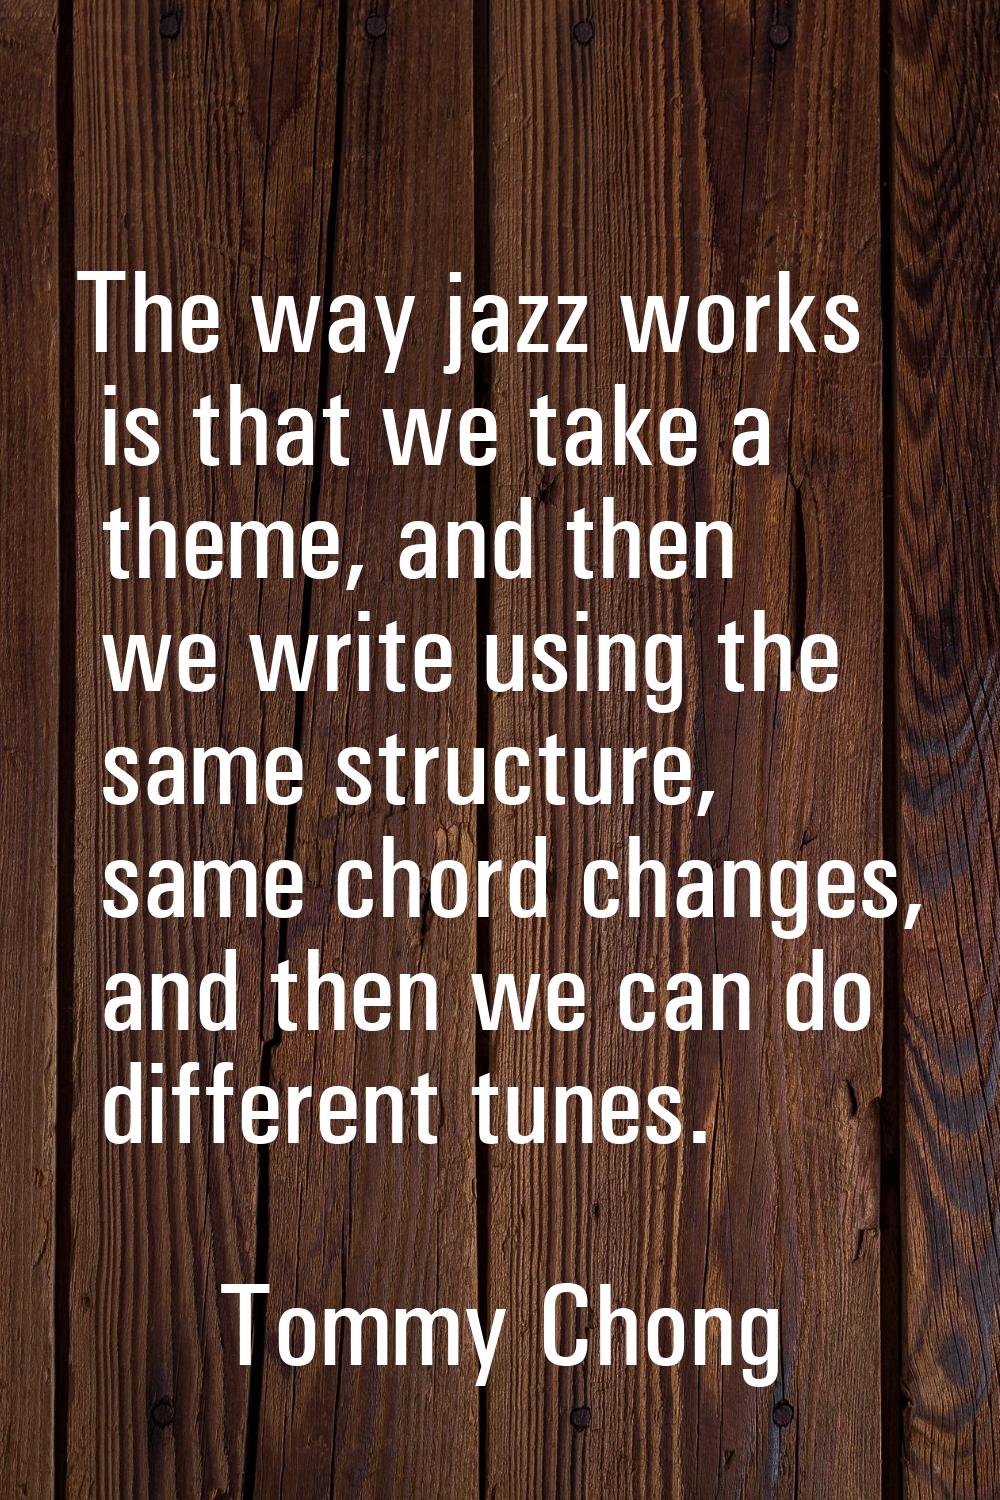 The way jazz works is that we take a theme, and then we write using the same structure, same chord 